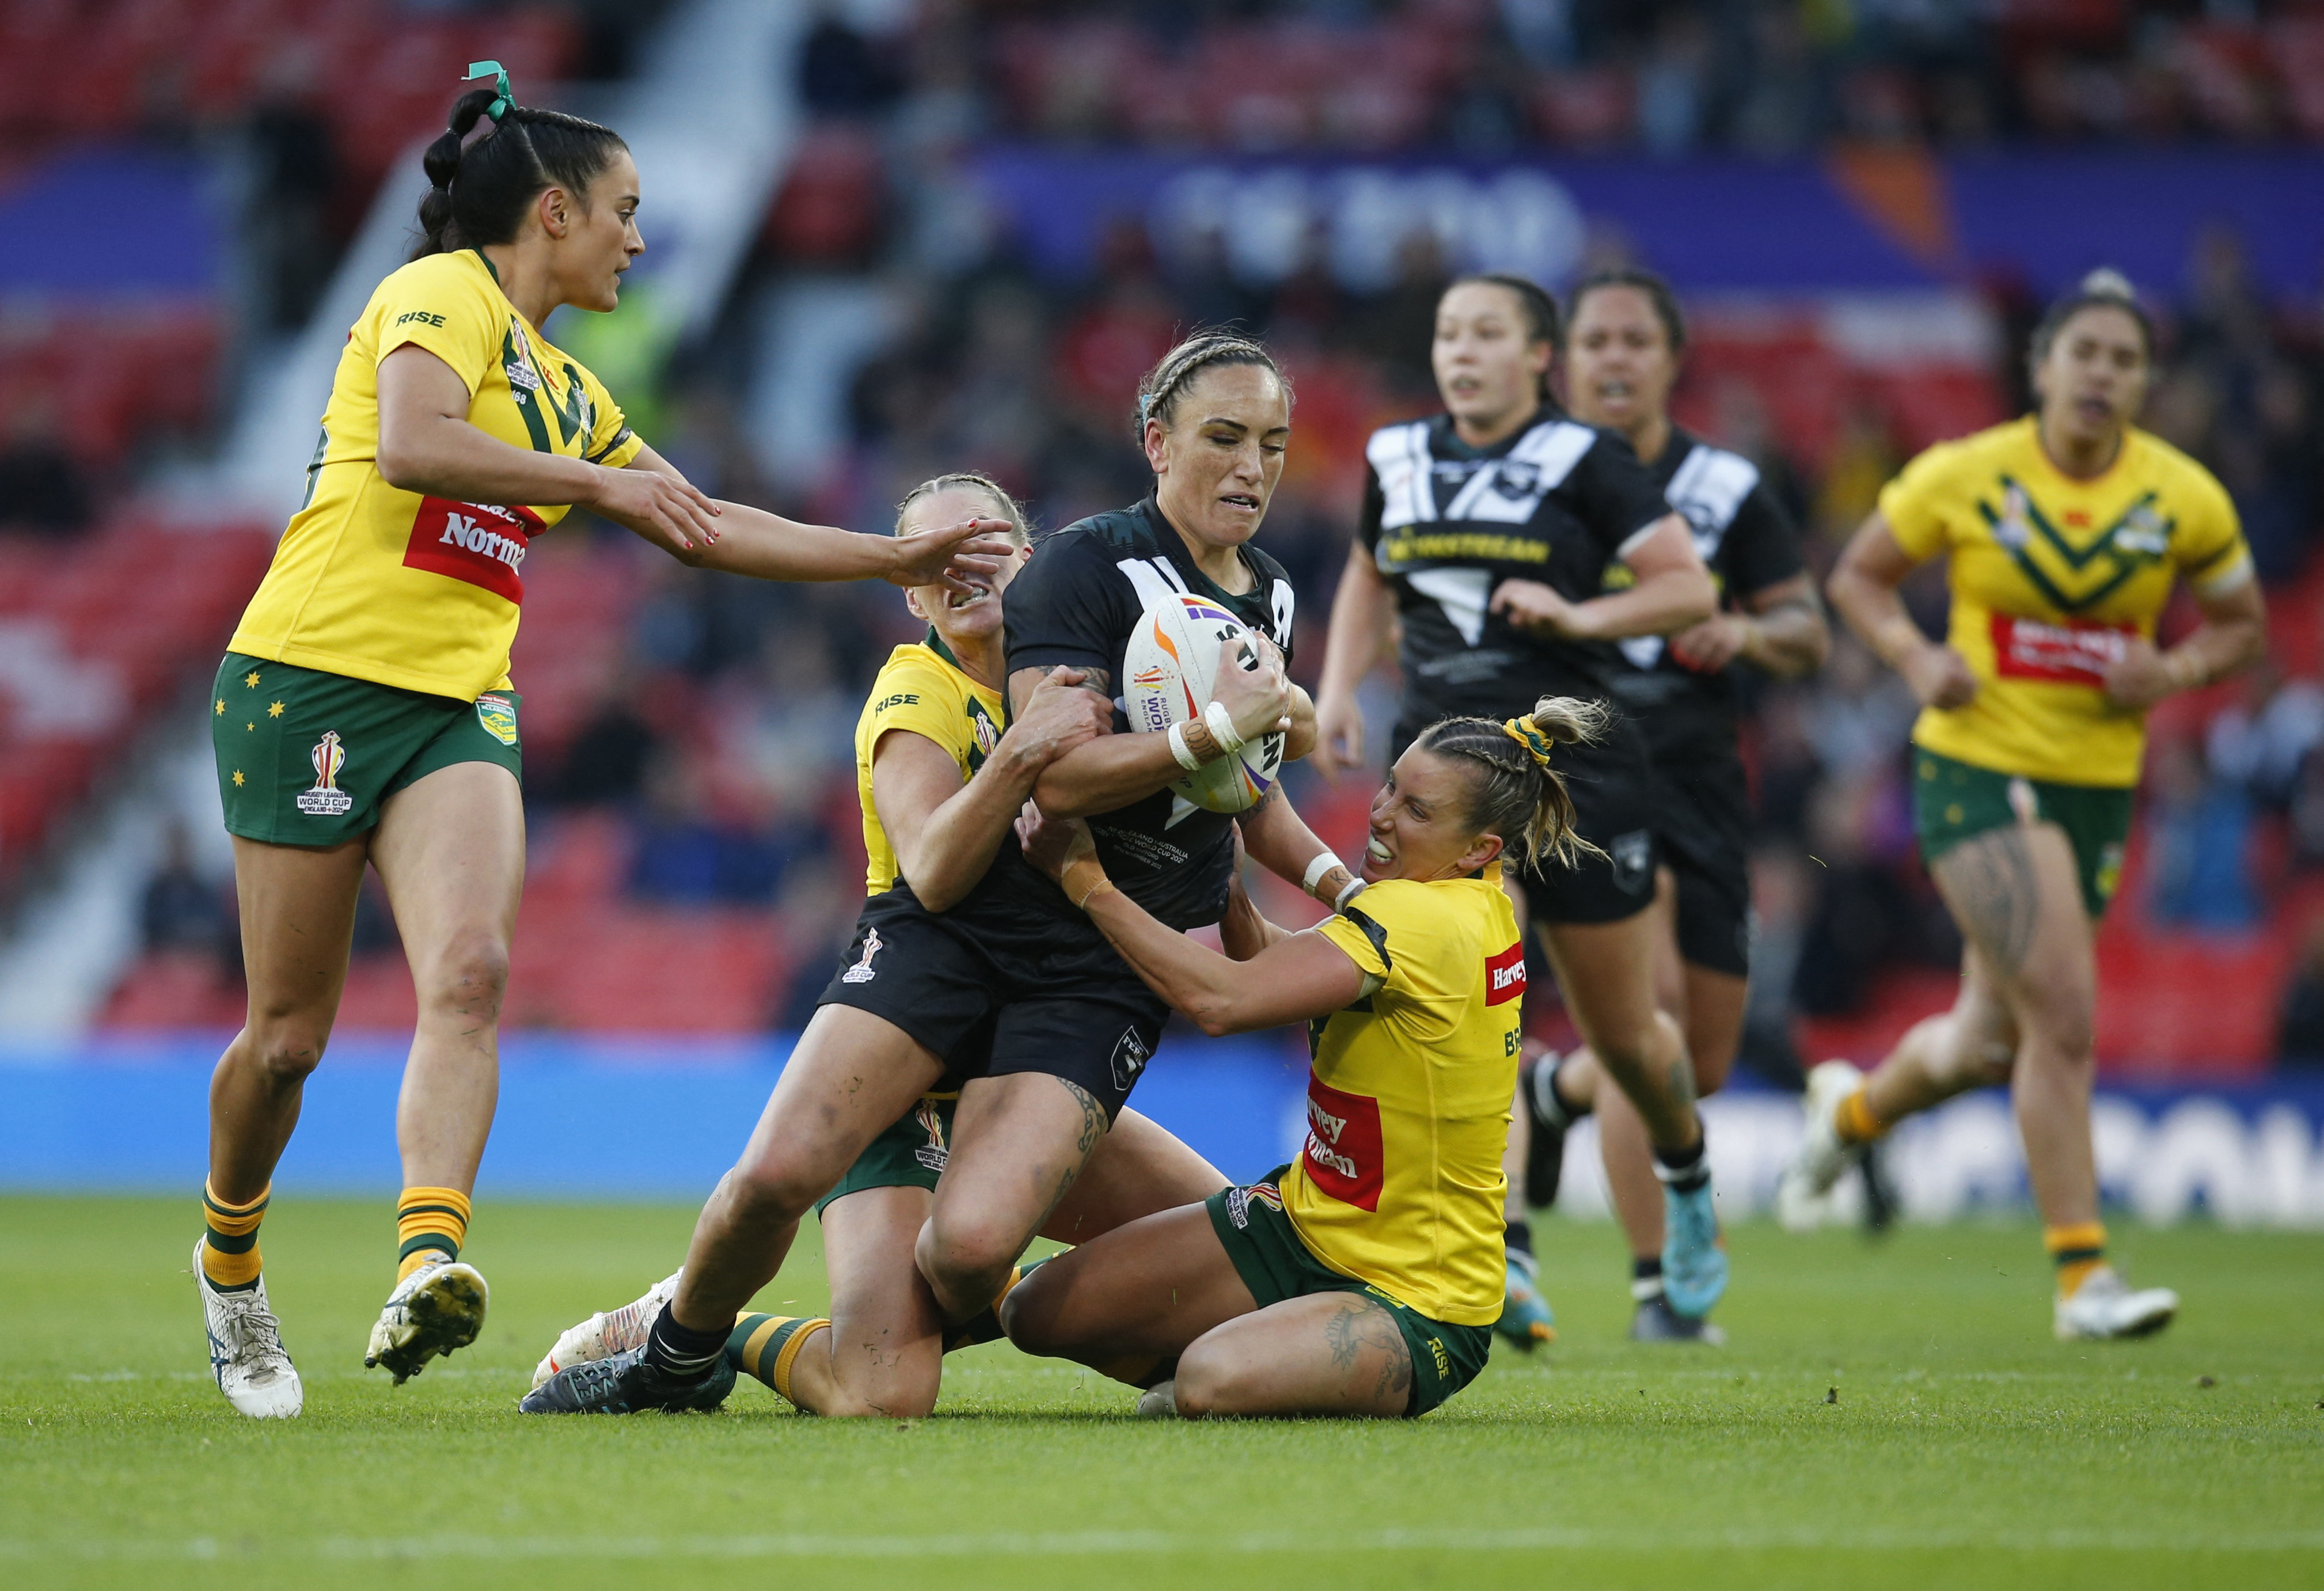 Brazil tipped to cause shock at women's 2021 Rugby League World